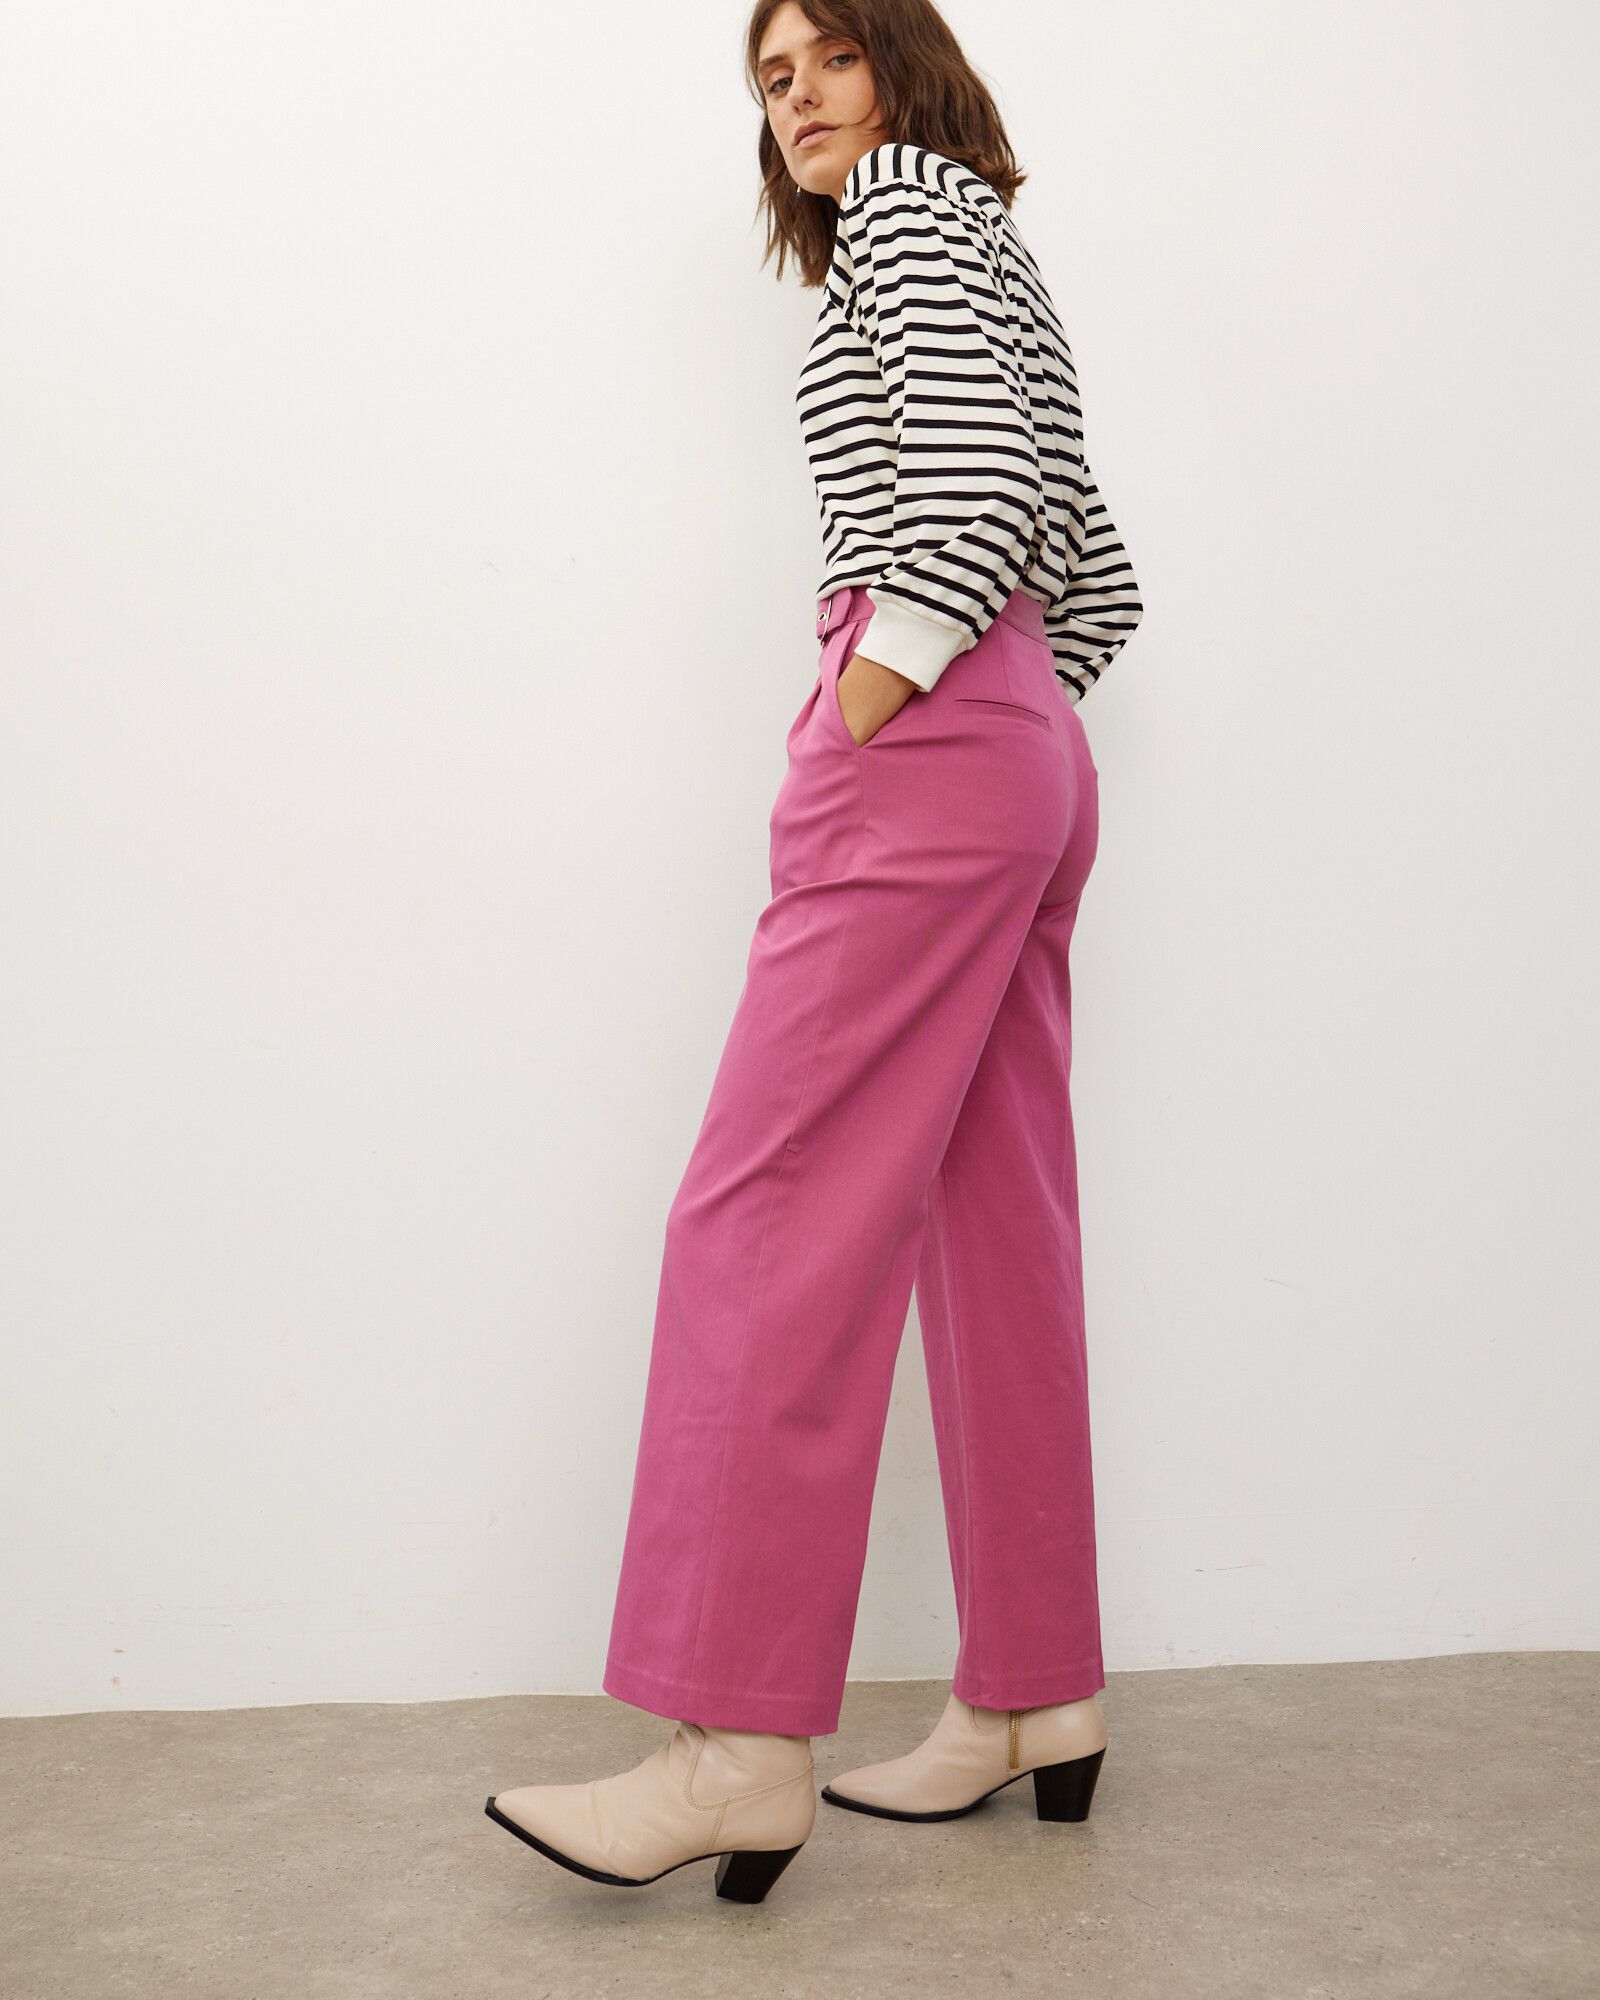 Pretty in Pink: Styling with Chic Pink Trousers